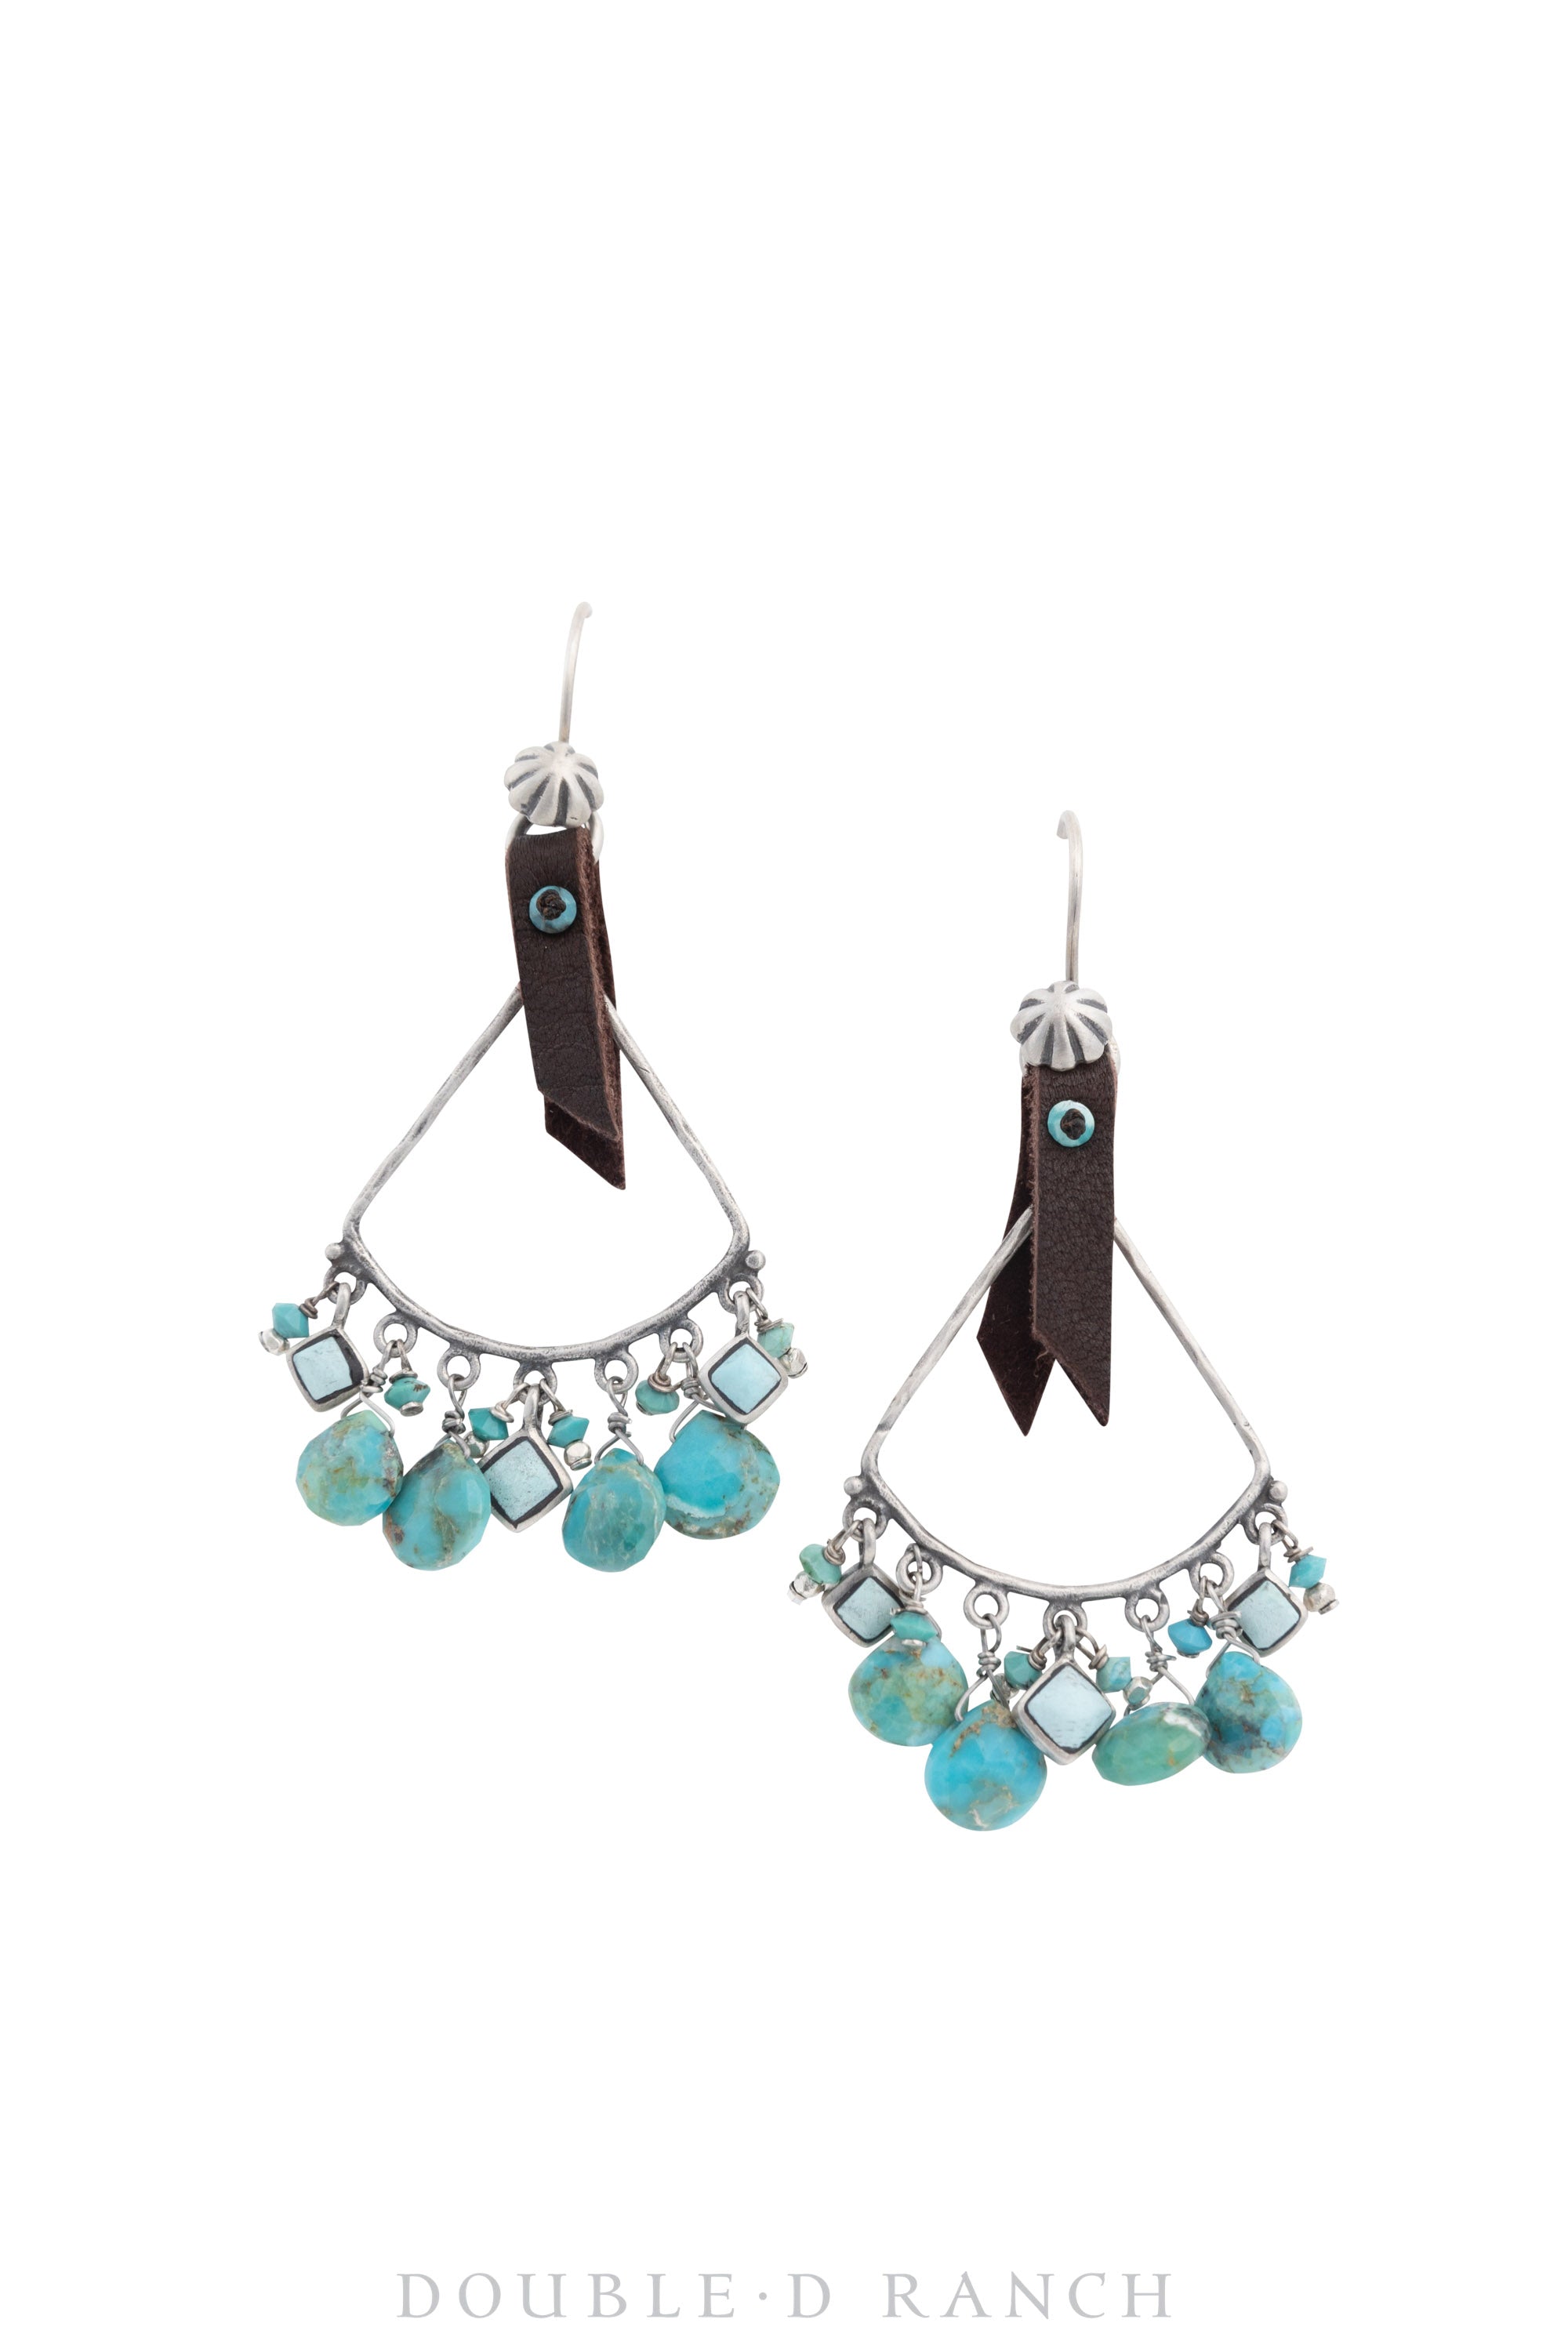 Earrings, Chandeliers, Turquoise, Triangle Sweeps, Contemporary, 1493